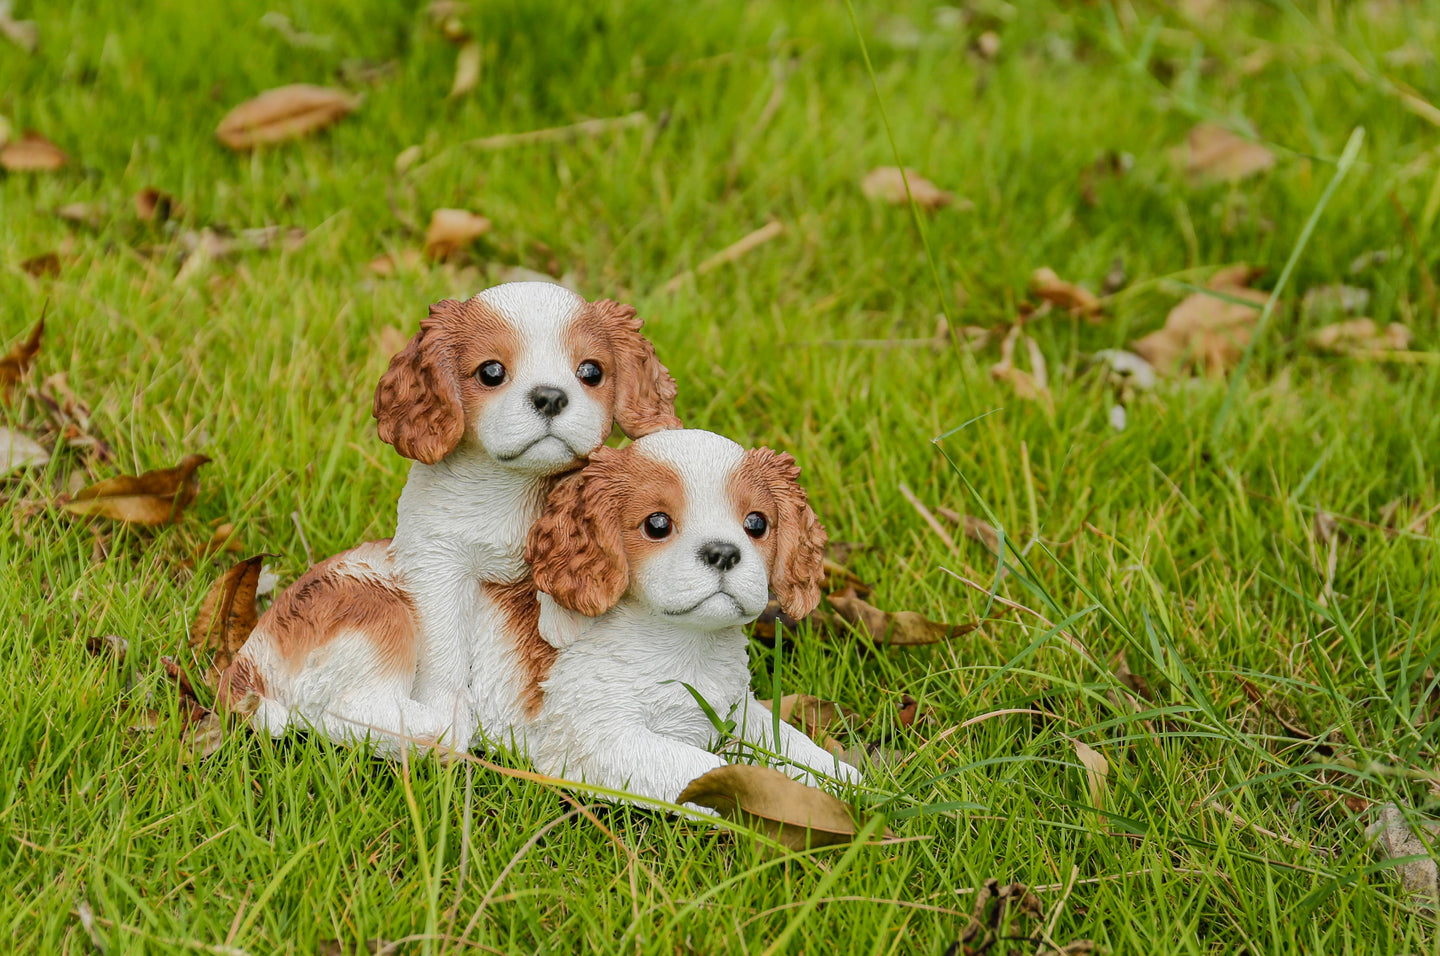 87637-A - King Charles Puppies Sitting